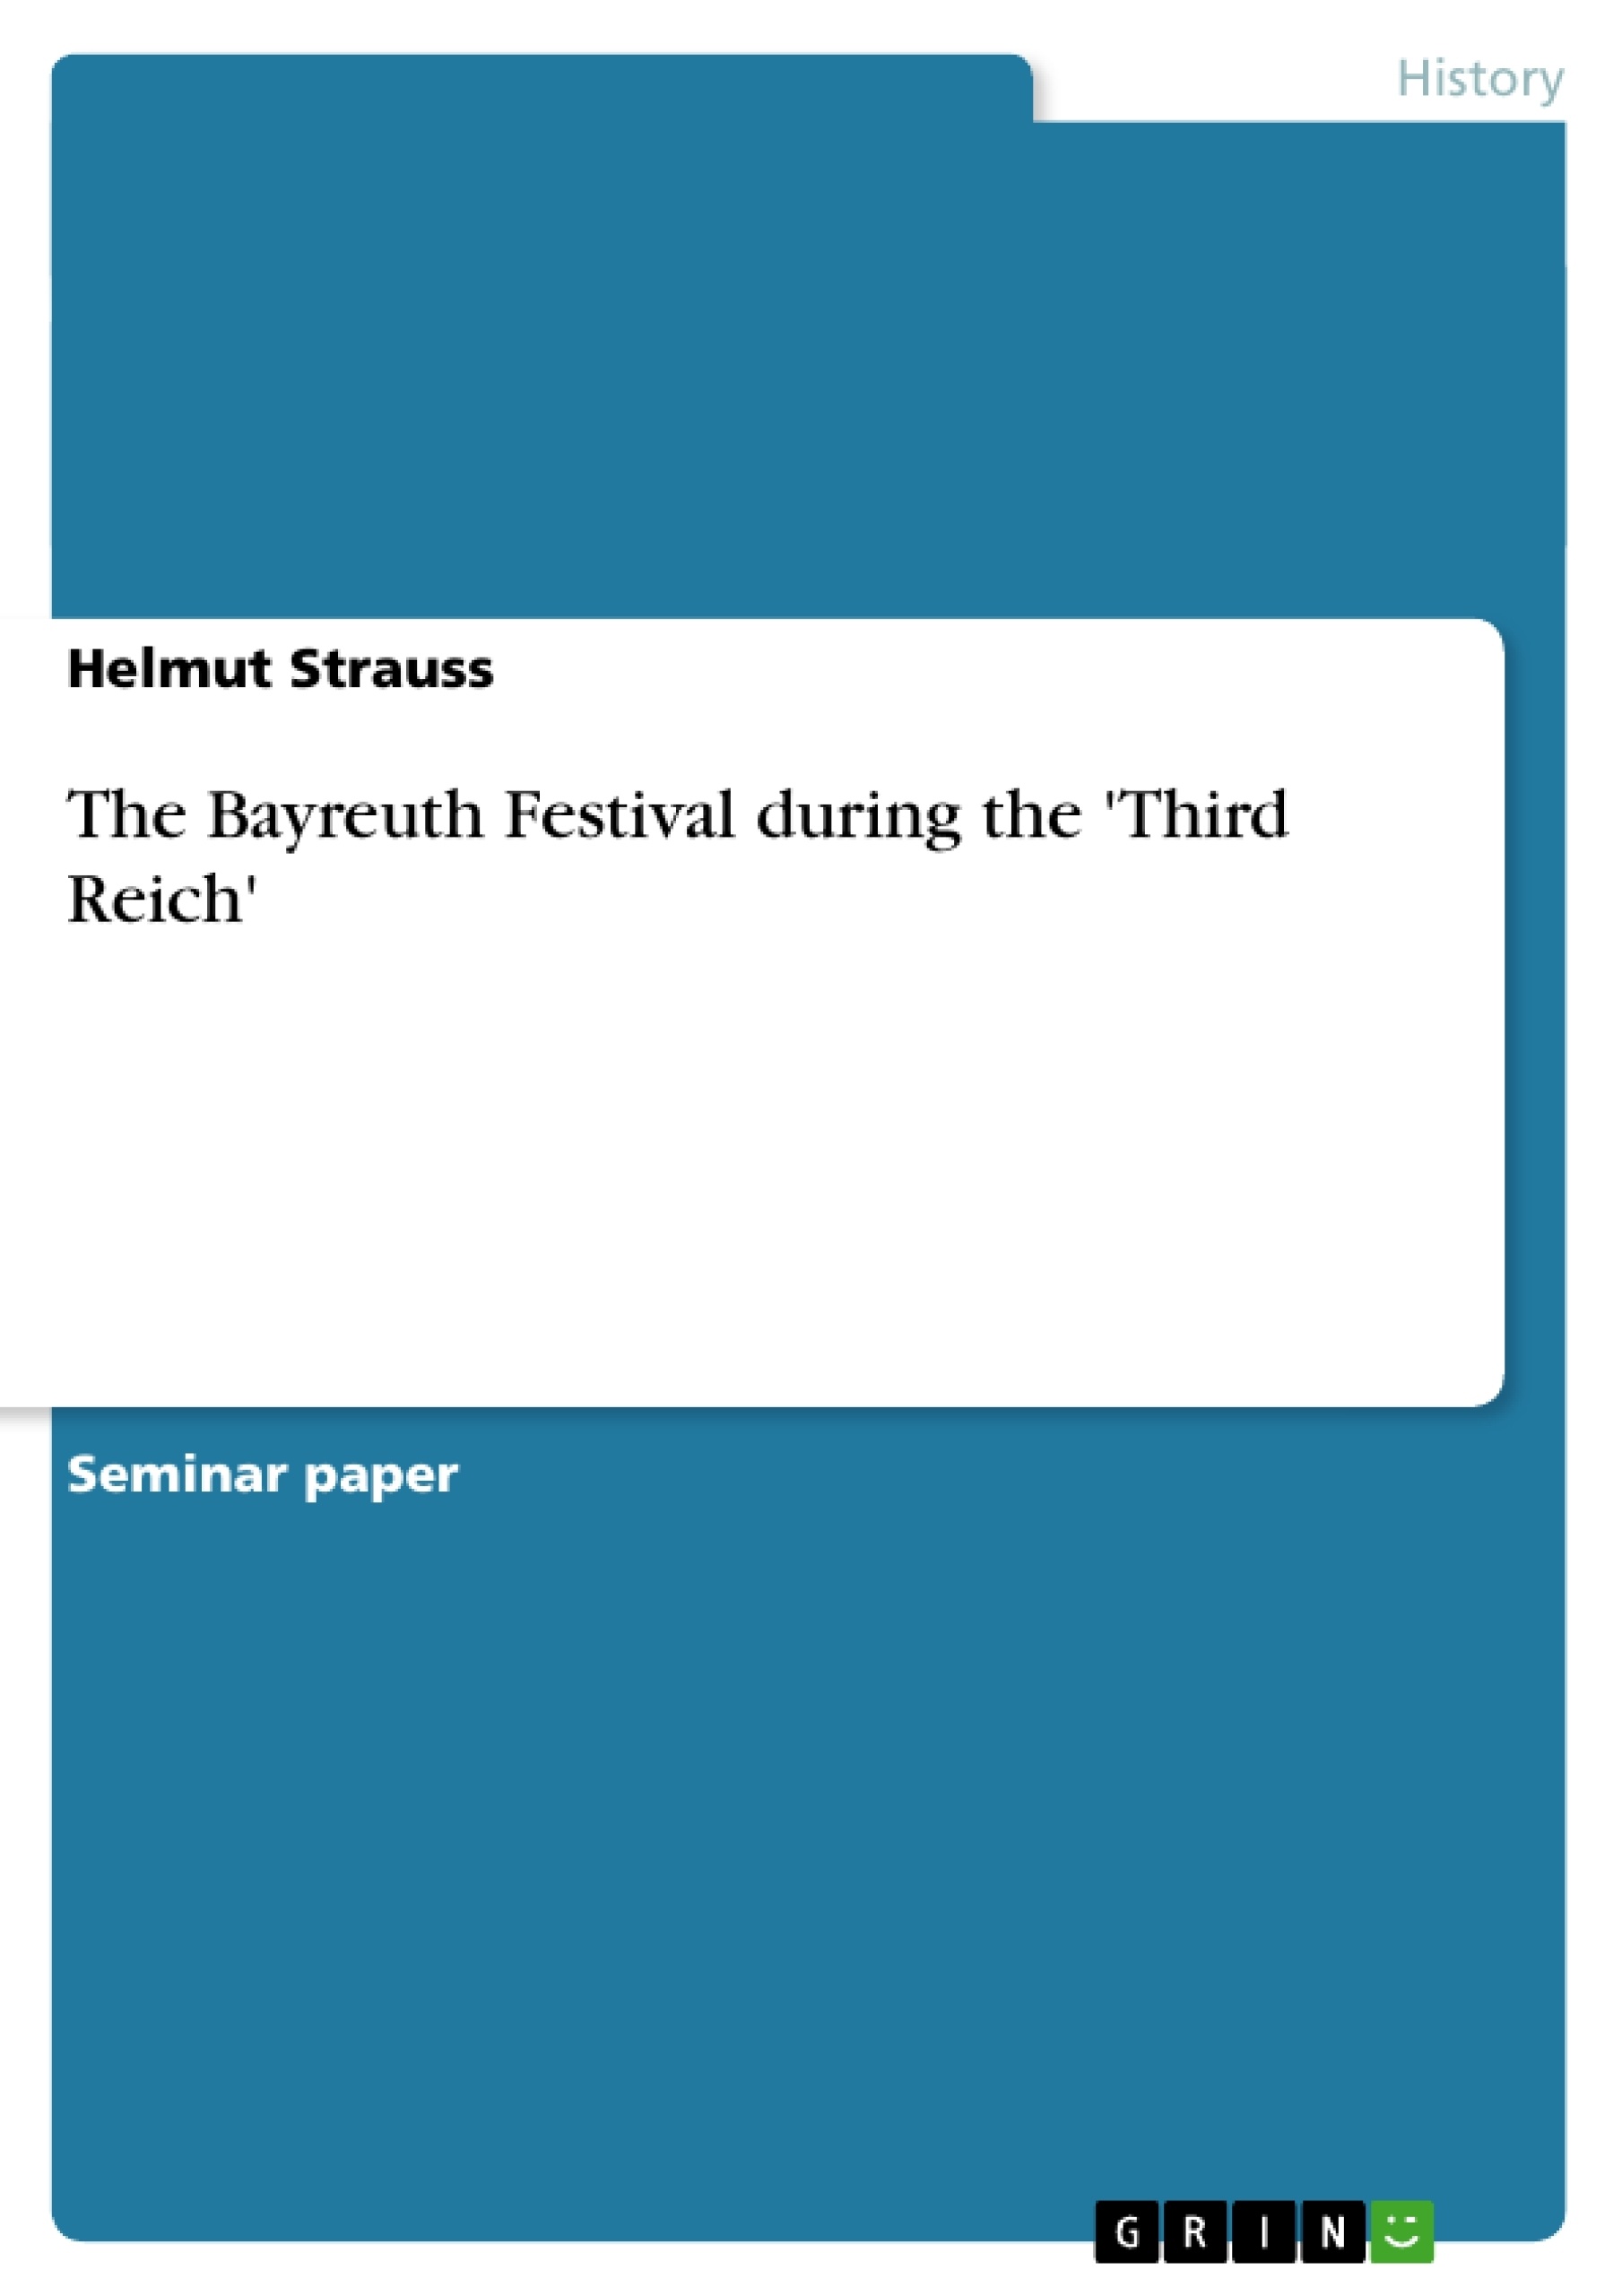 Title: The Bayreuth Festival during the 'Third Reich'